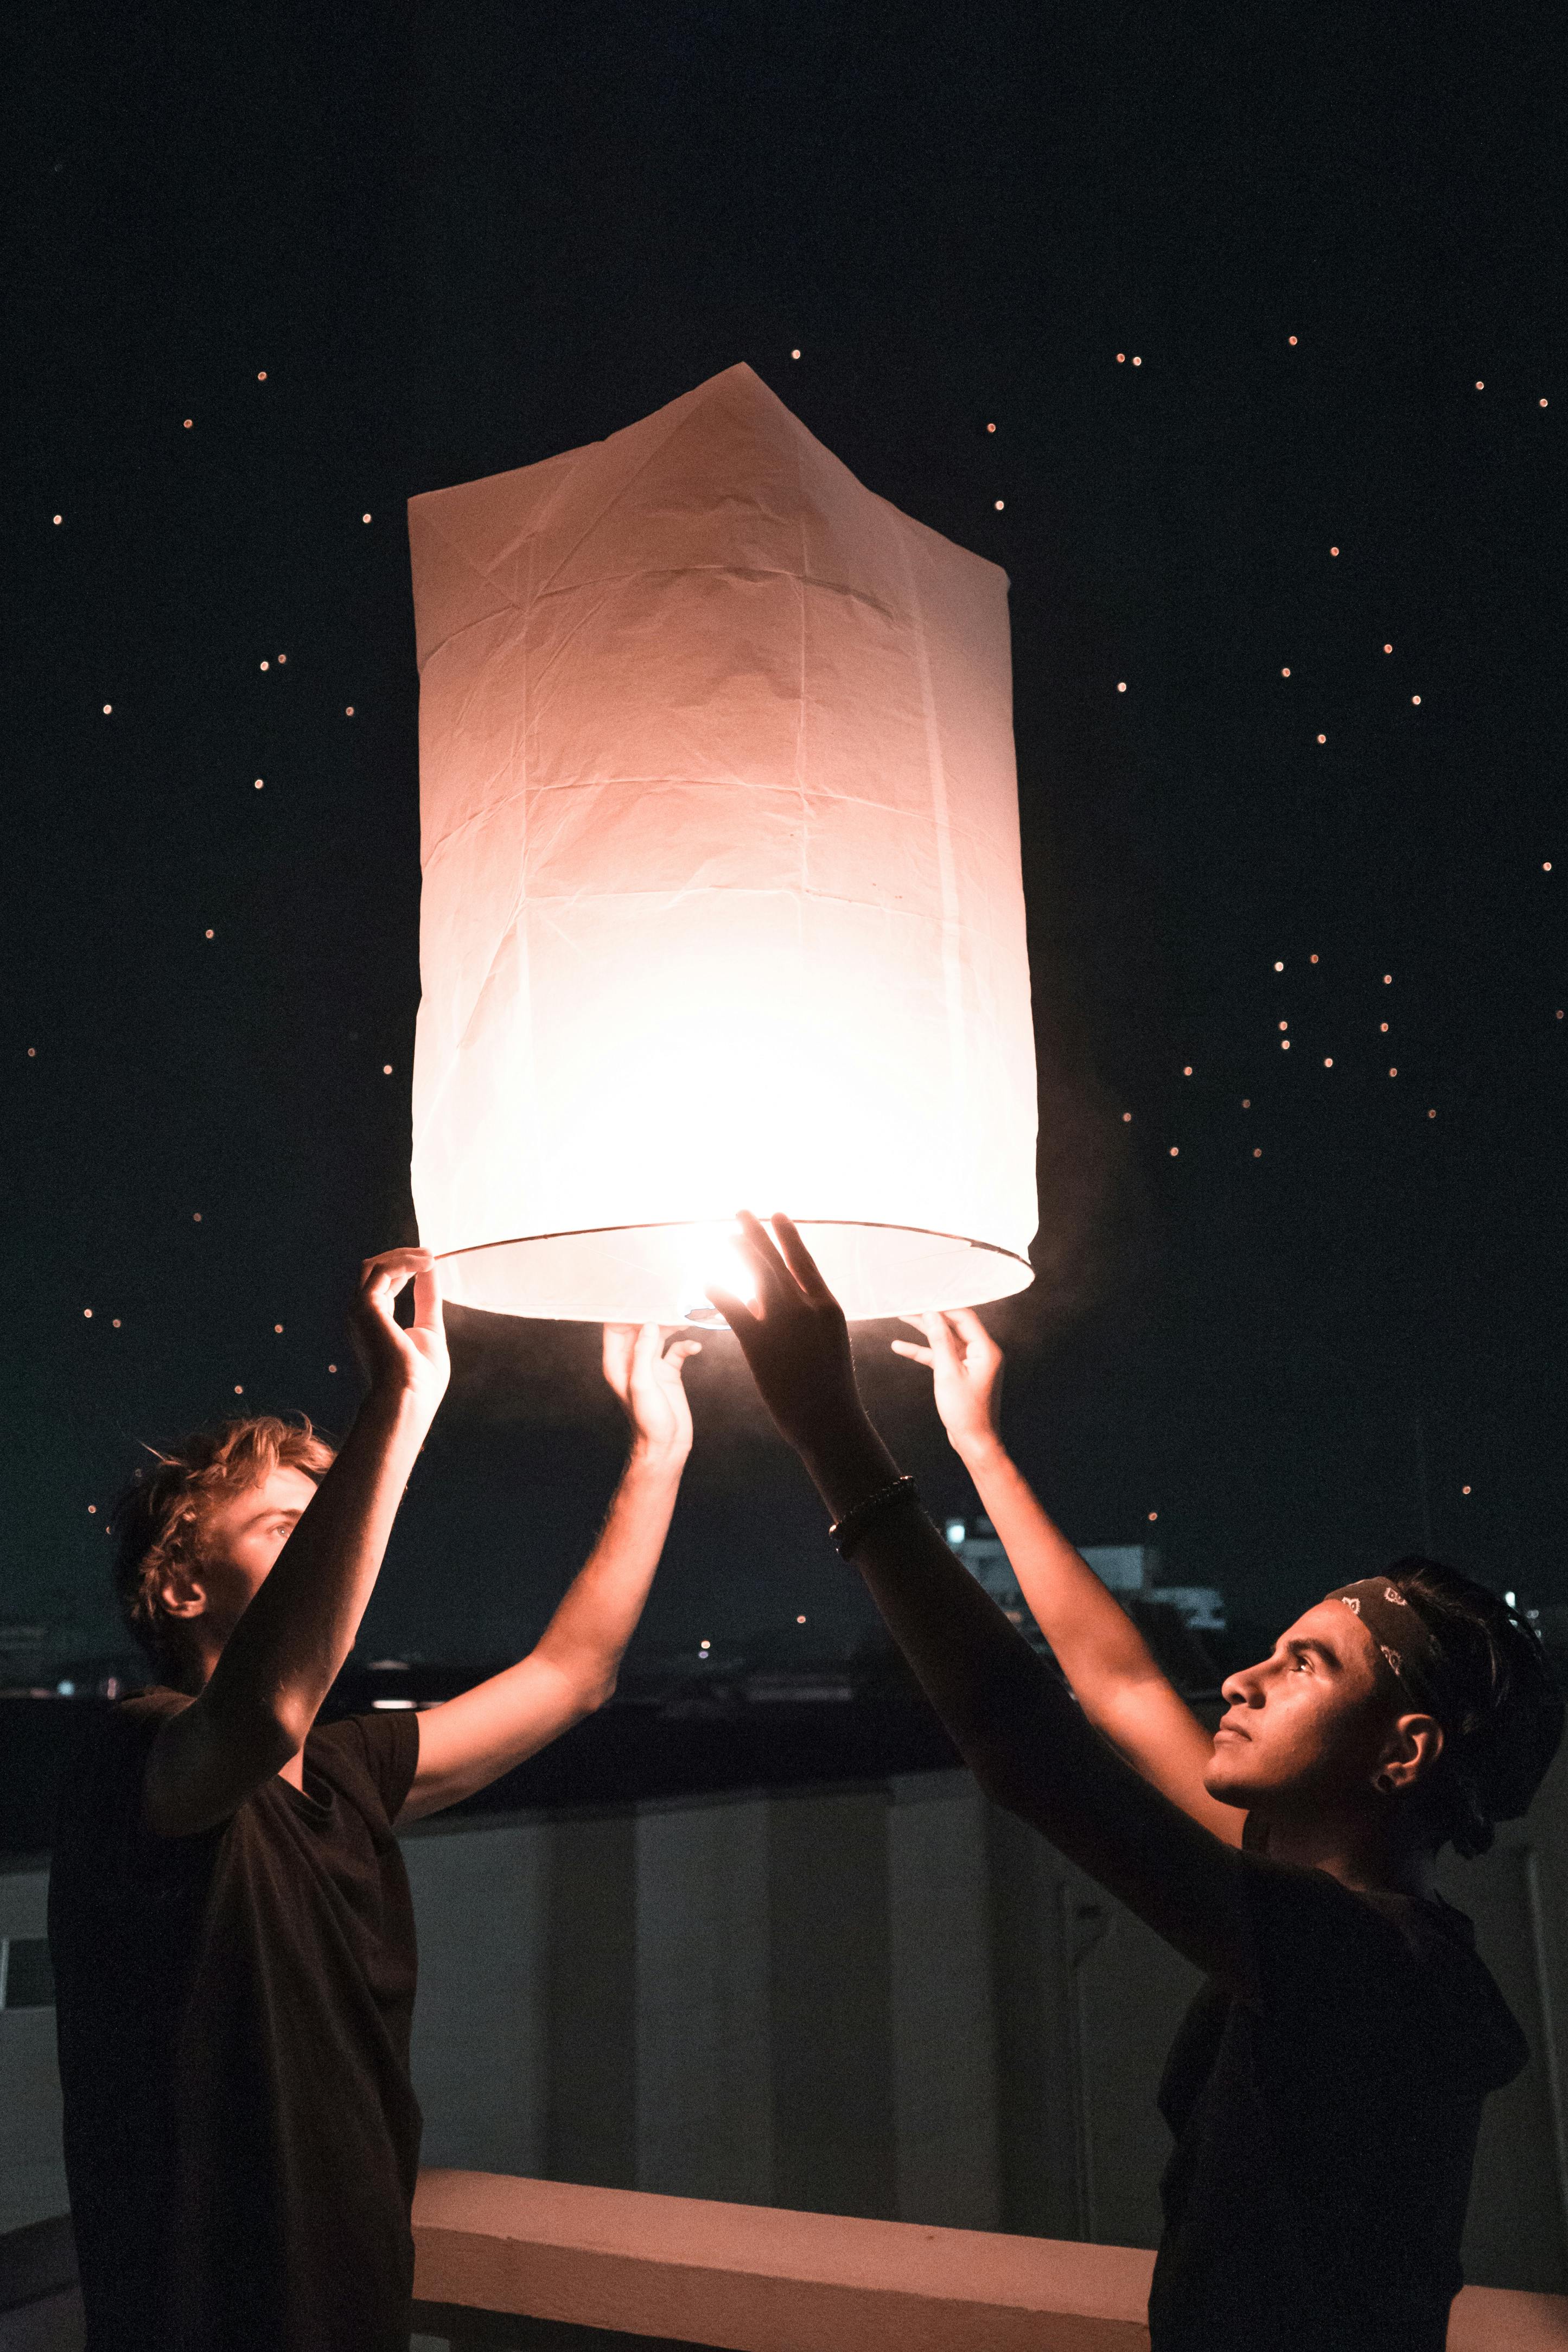 Sky Lantern Lighting by a Pair of Hands Holding the Paper Hot Air Balloon  in a Black Background Stock Image - Image of flame, fanush: 150374447